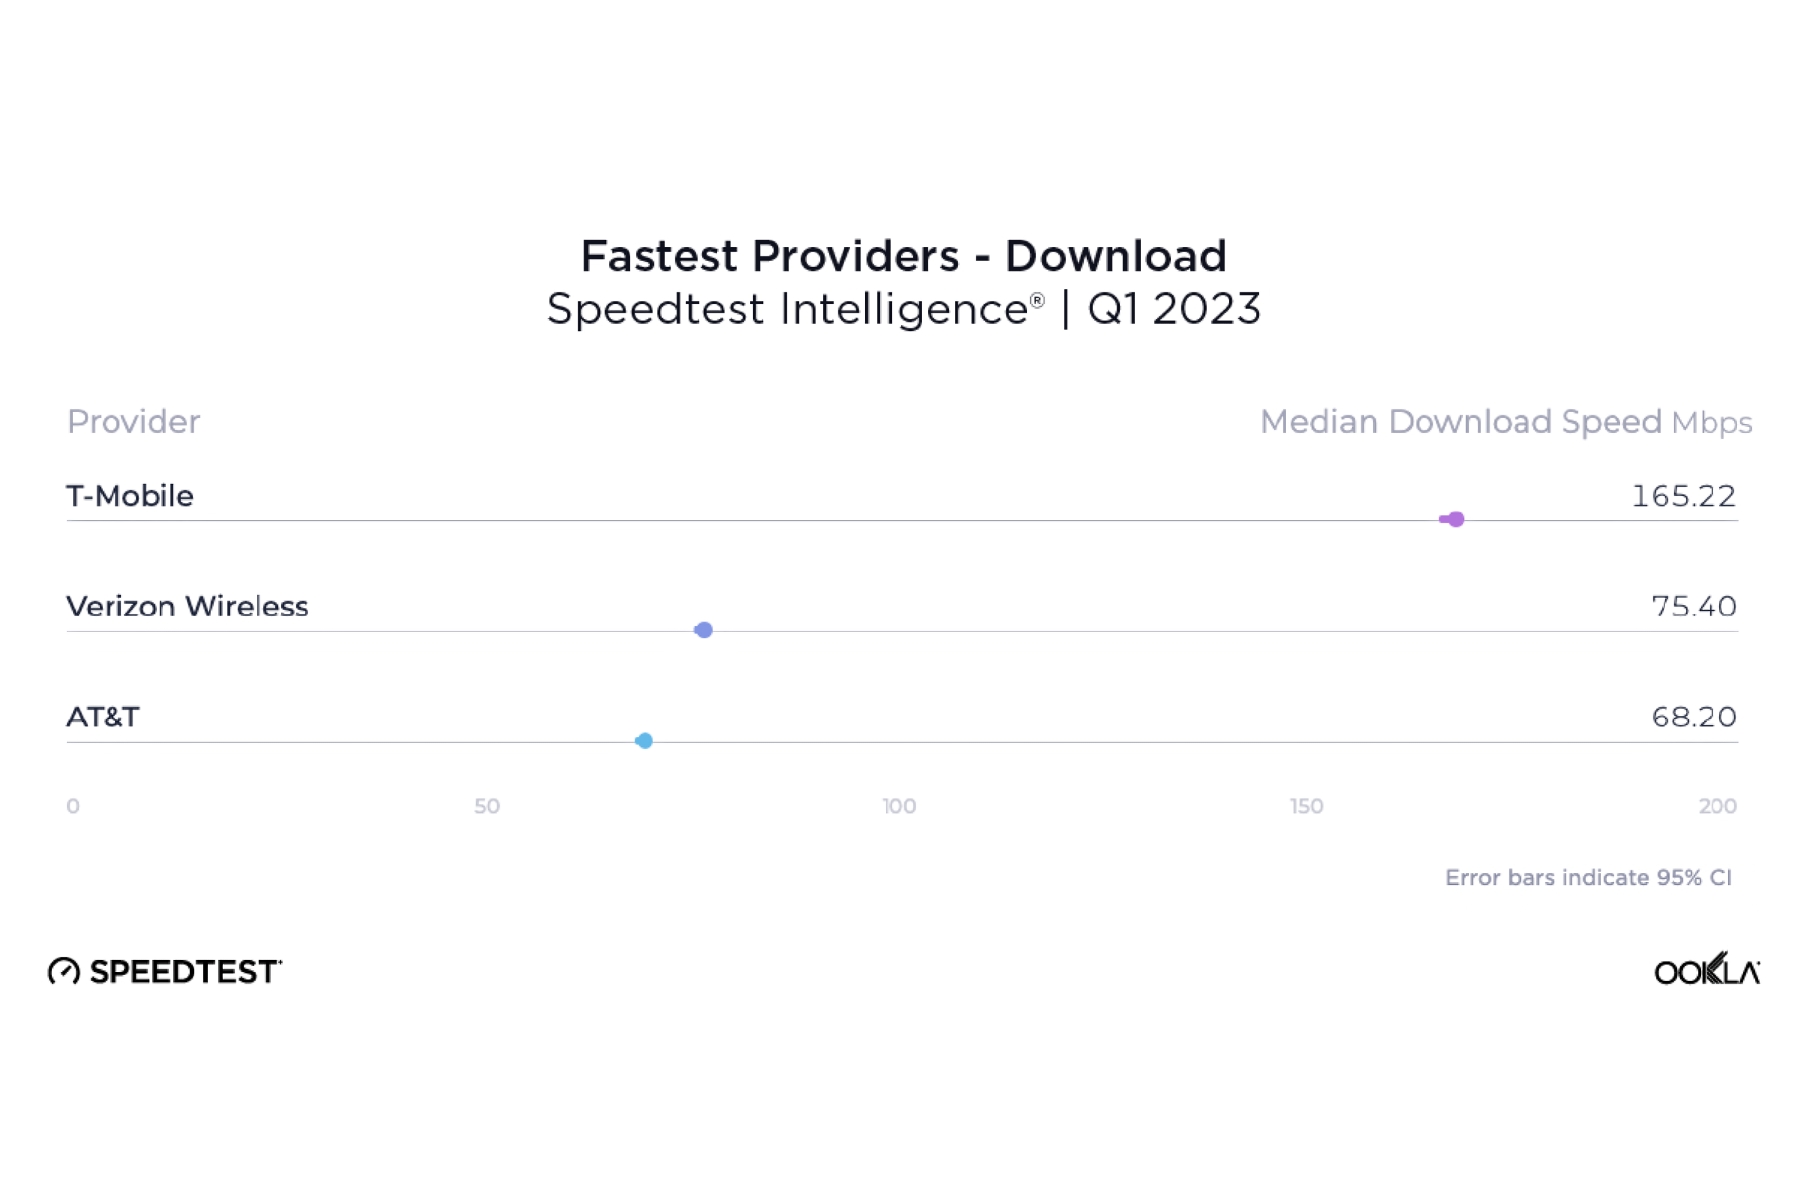 Chart showing download speeds among U.S. carriers for Q1 2023.